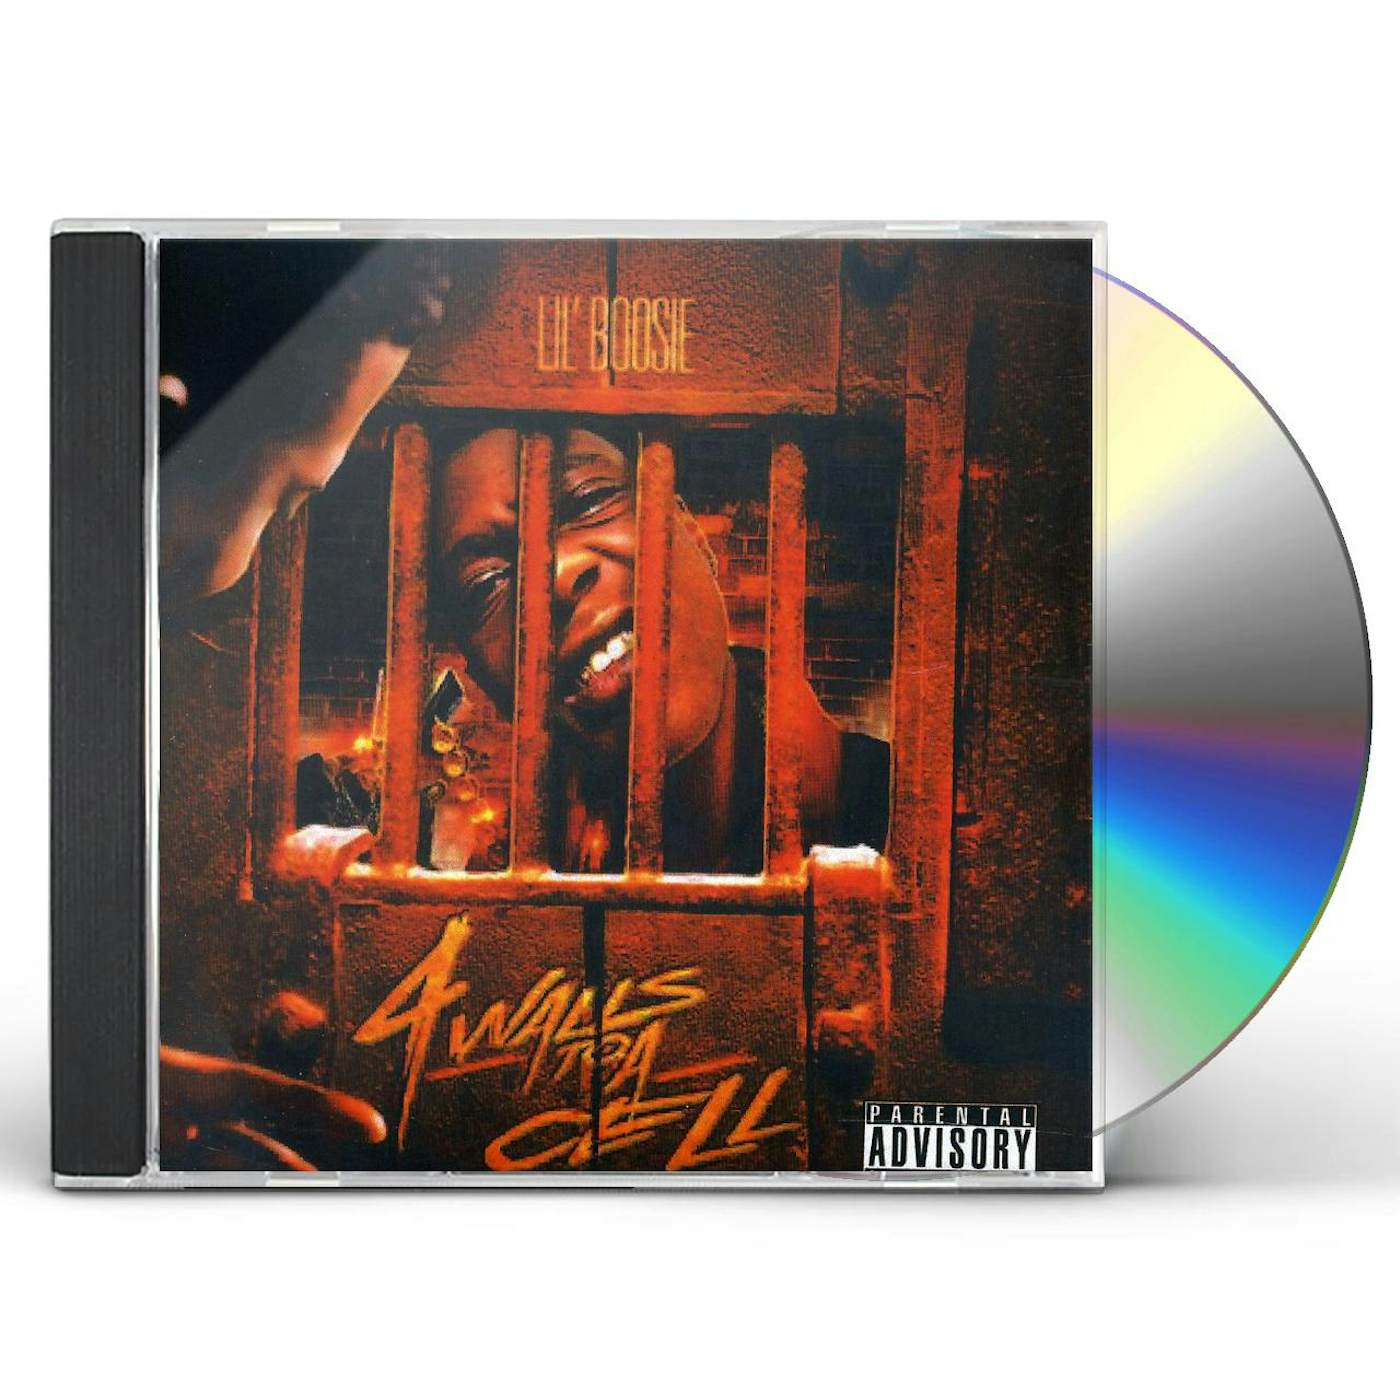 Boosie Badazz 4 WALLS TO A CELL CD